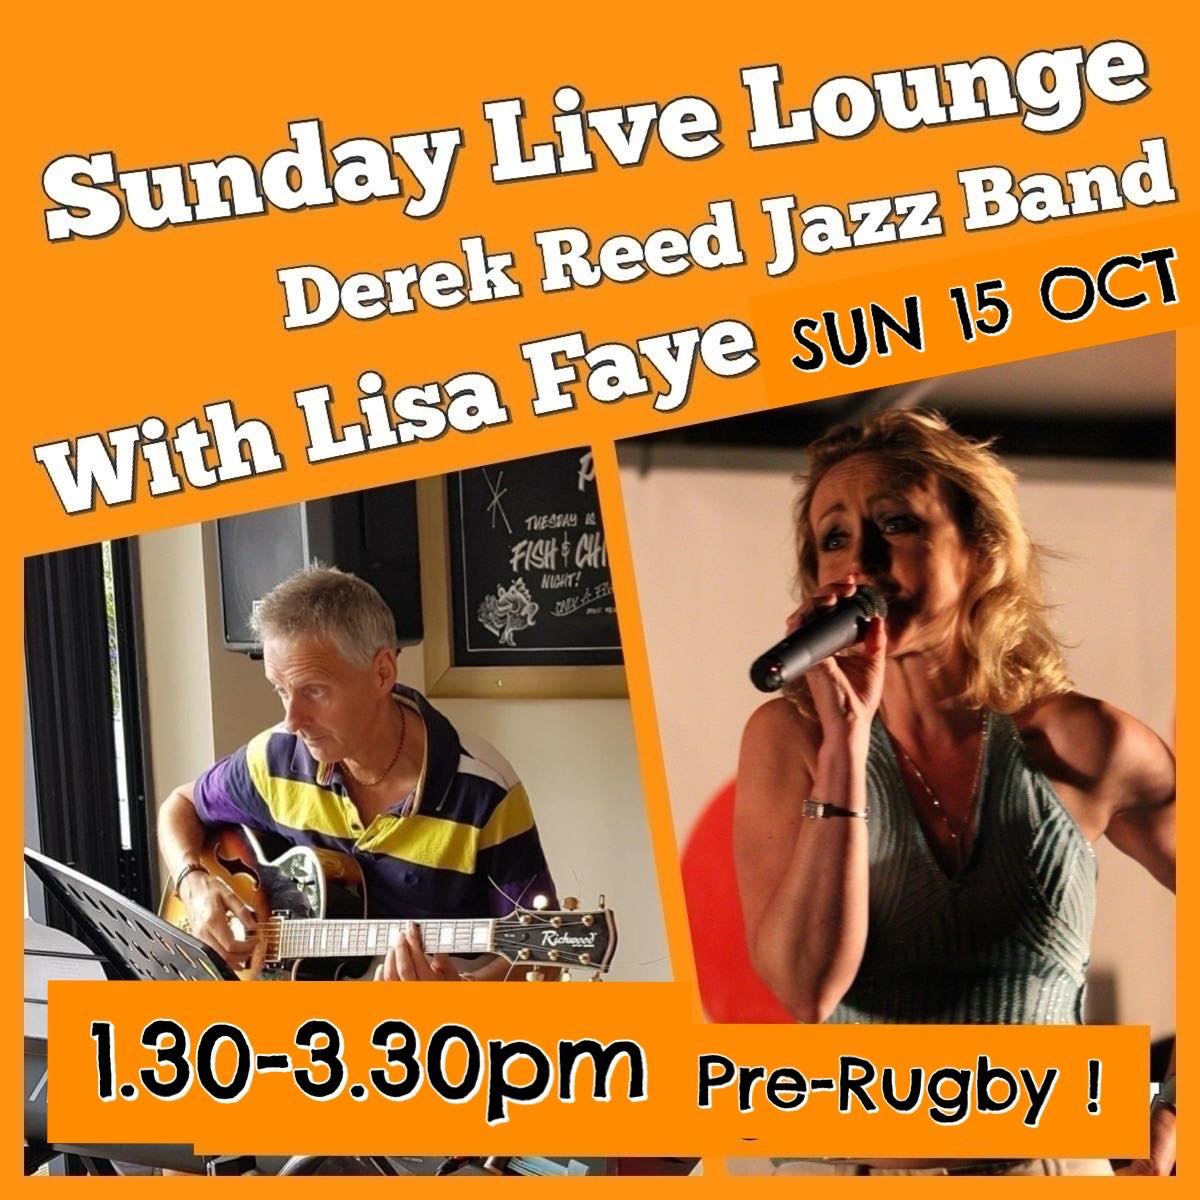 Sunday Live Lounge with the Derek Reed Jazz Band and Lisa Faye